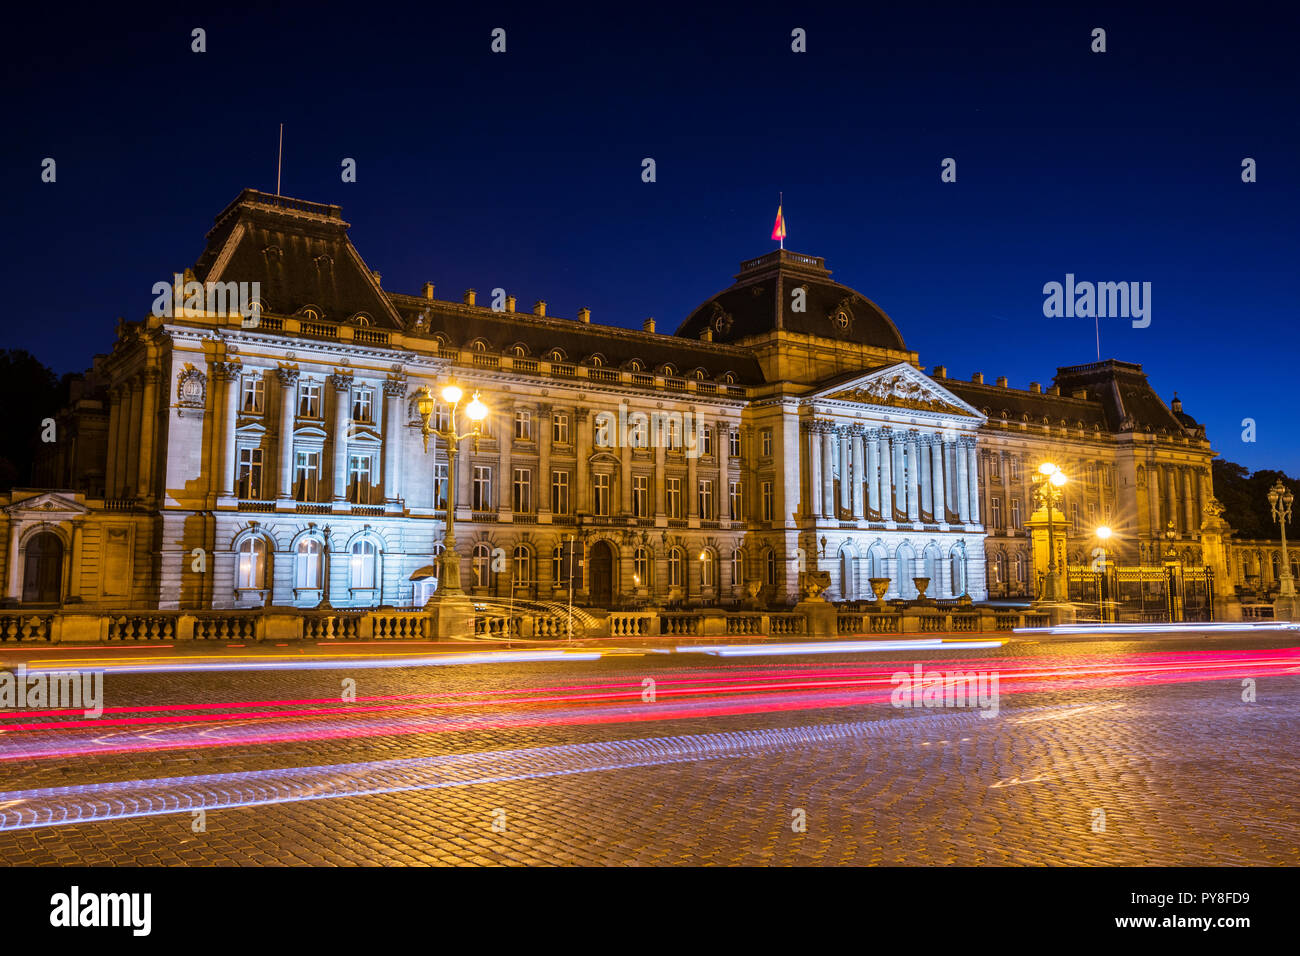 Royal Palace of Brussels at night with traffic lights Stock Photo